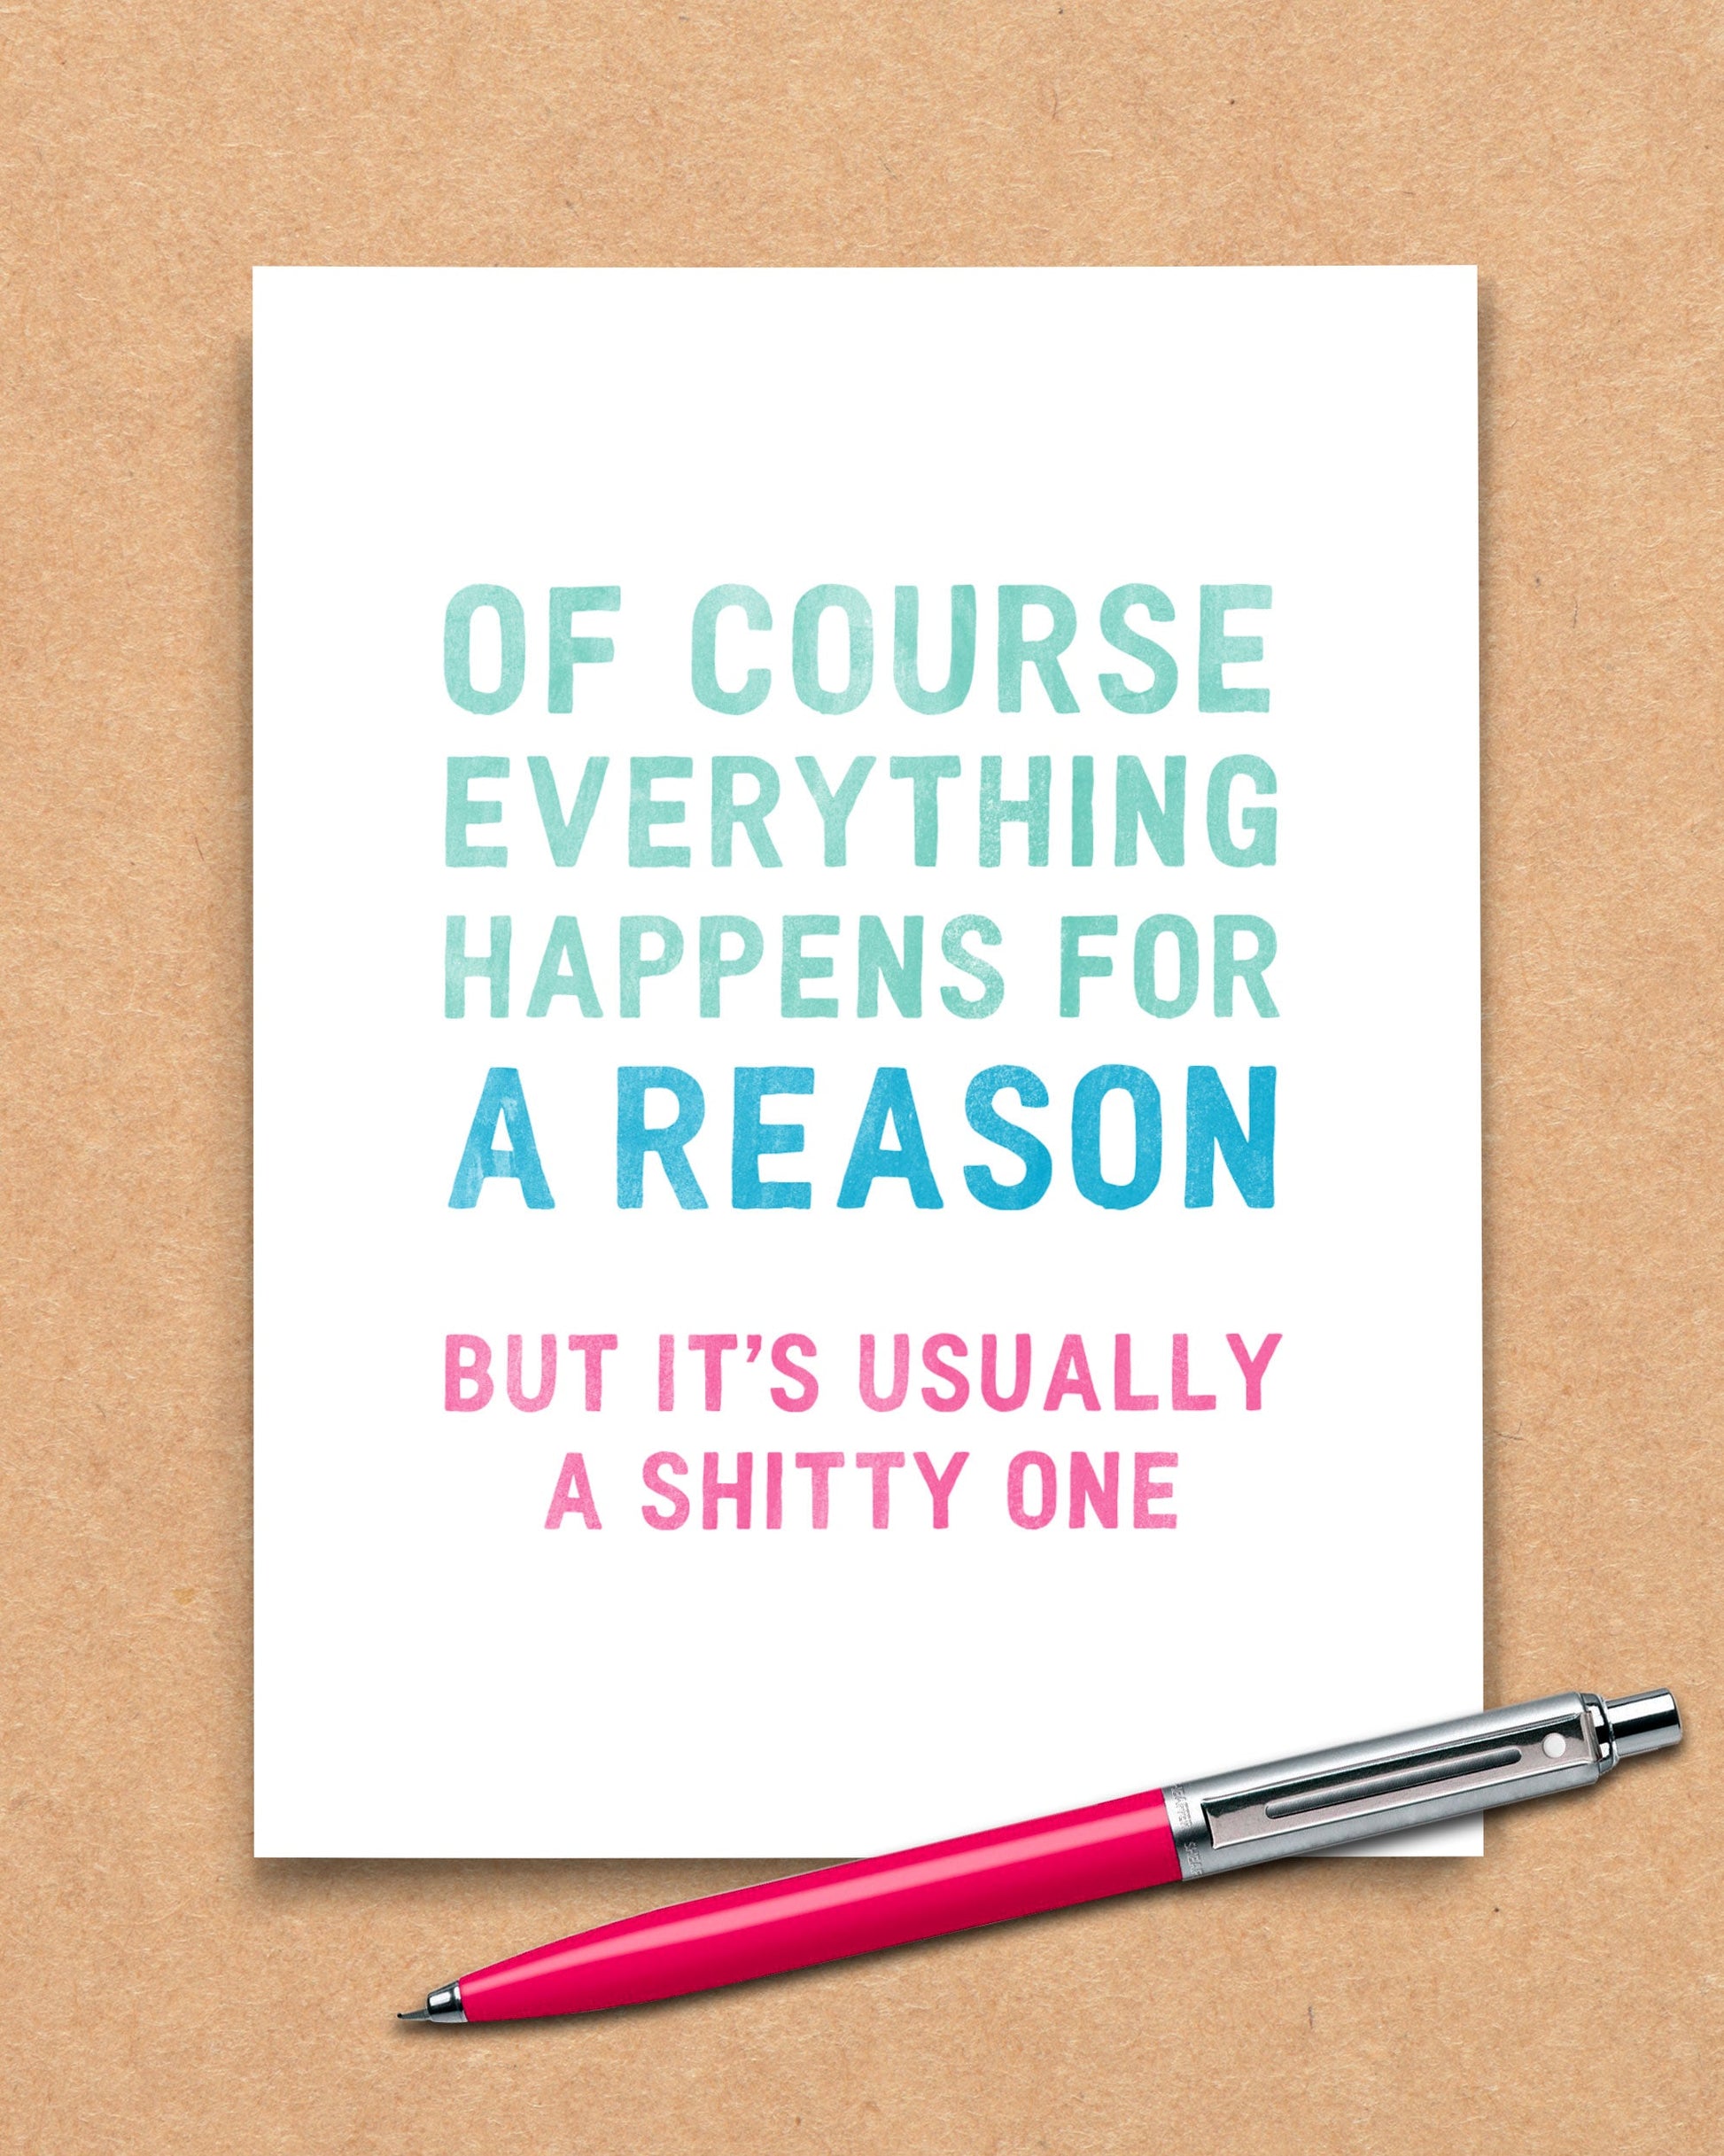 Snarky Everything Happens for a Reason Card with red pen - Transit Design - Smirkantile